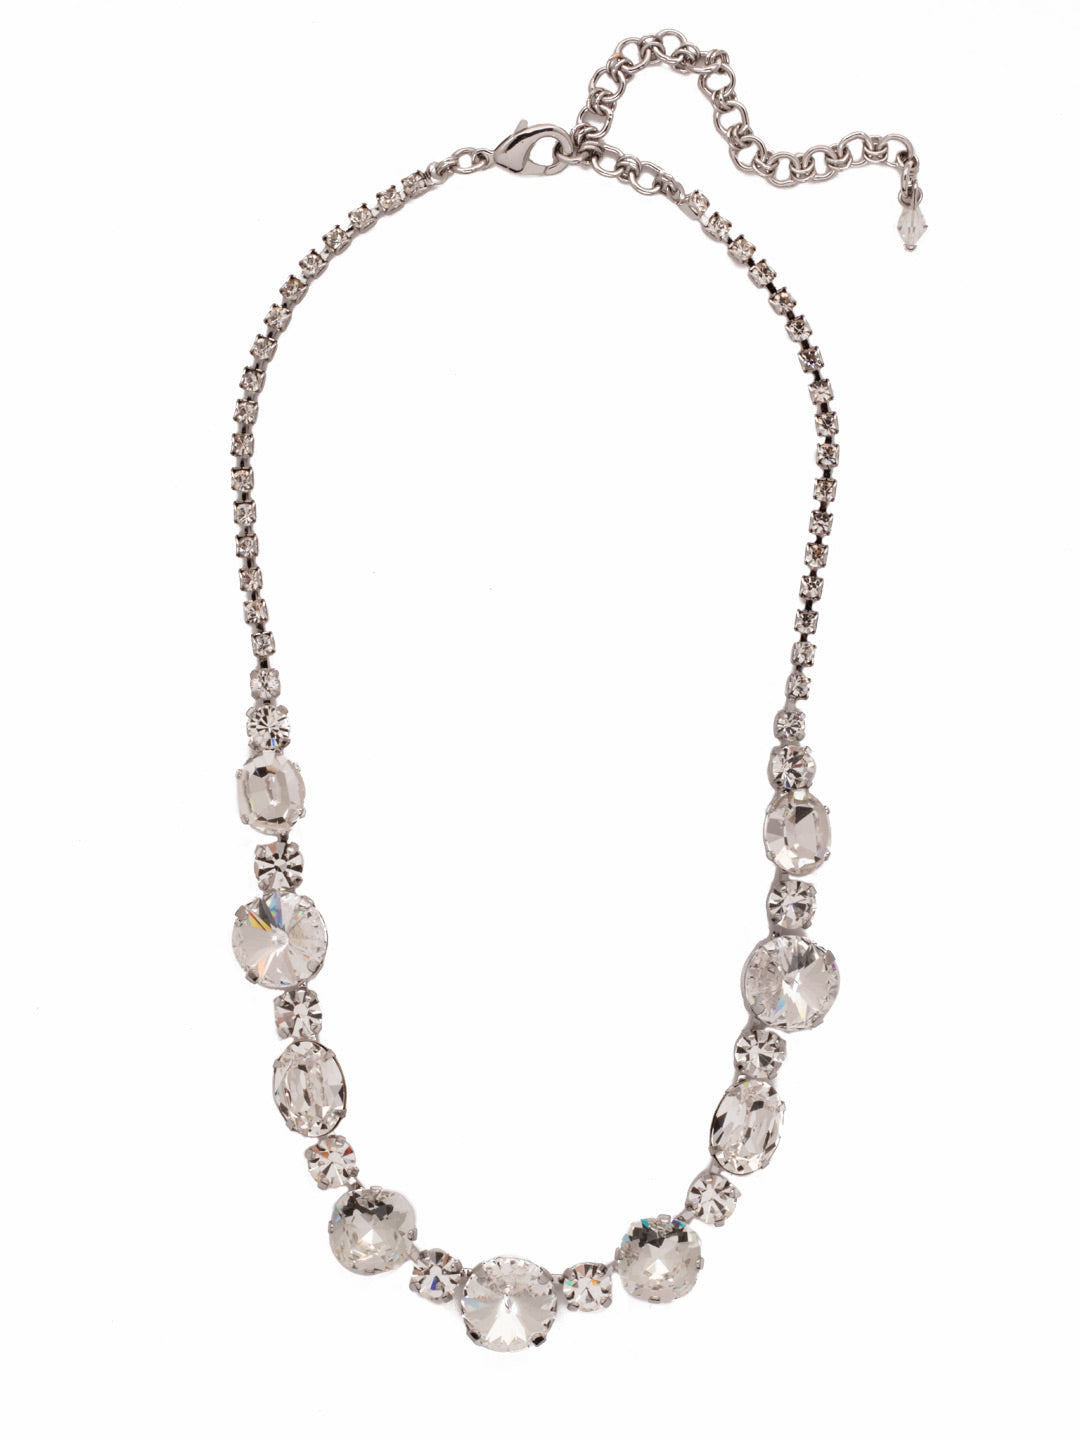 Full Circle Statement Necklace - NDQ43PDCRY - <p>Need a look that goes full circle? Three circular rivoli crystals mix with other round and oval gems in this everyday stunner. A rhinestone chain completes the look for all-around allure. From Sorrelli's Crystal collection in our Palladium finish.</p>